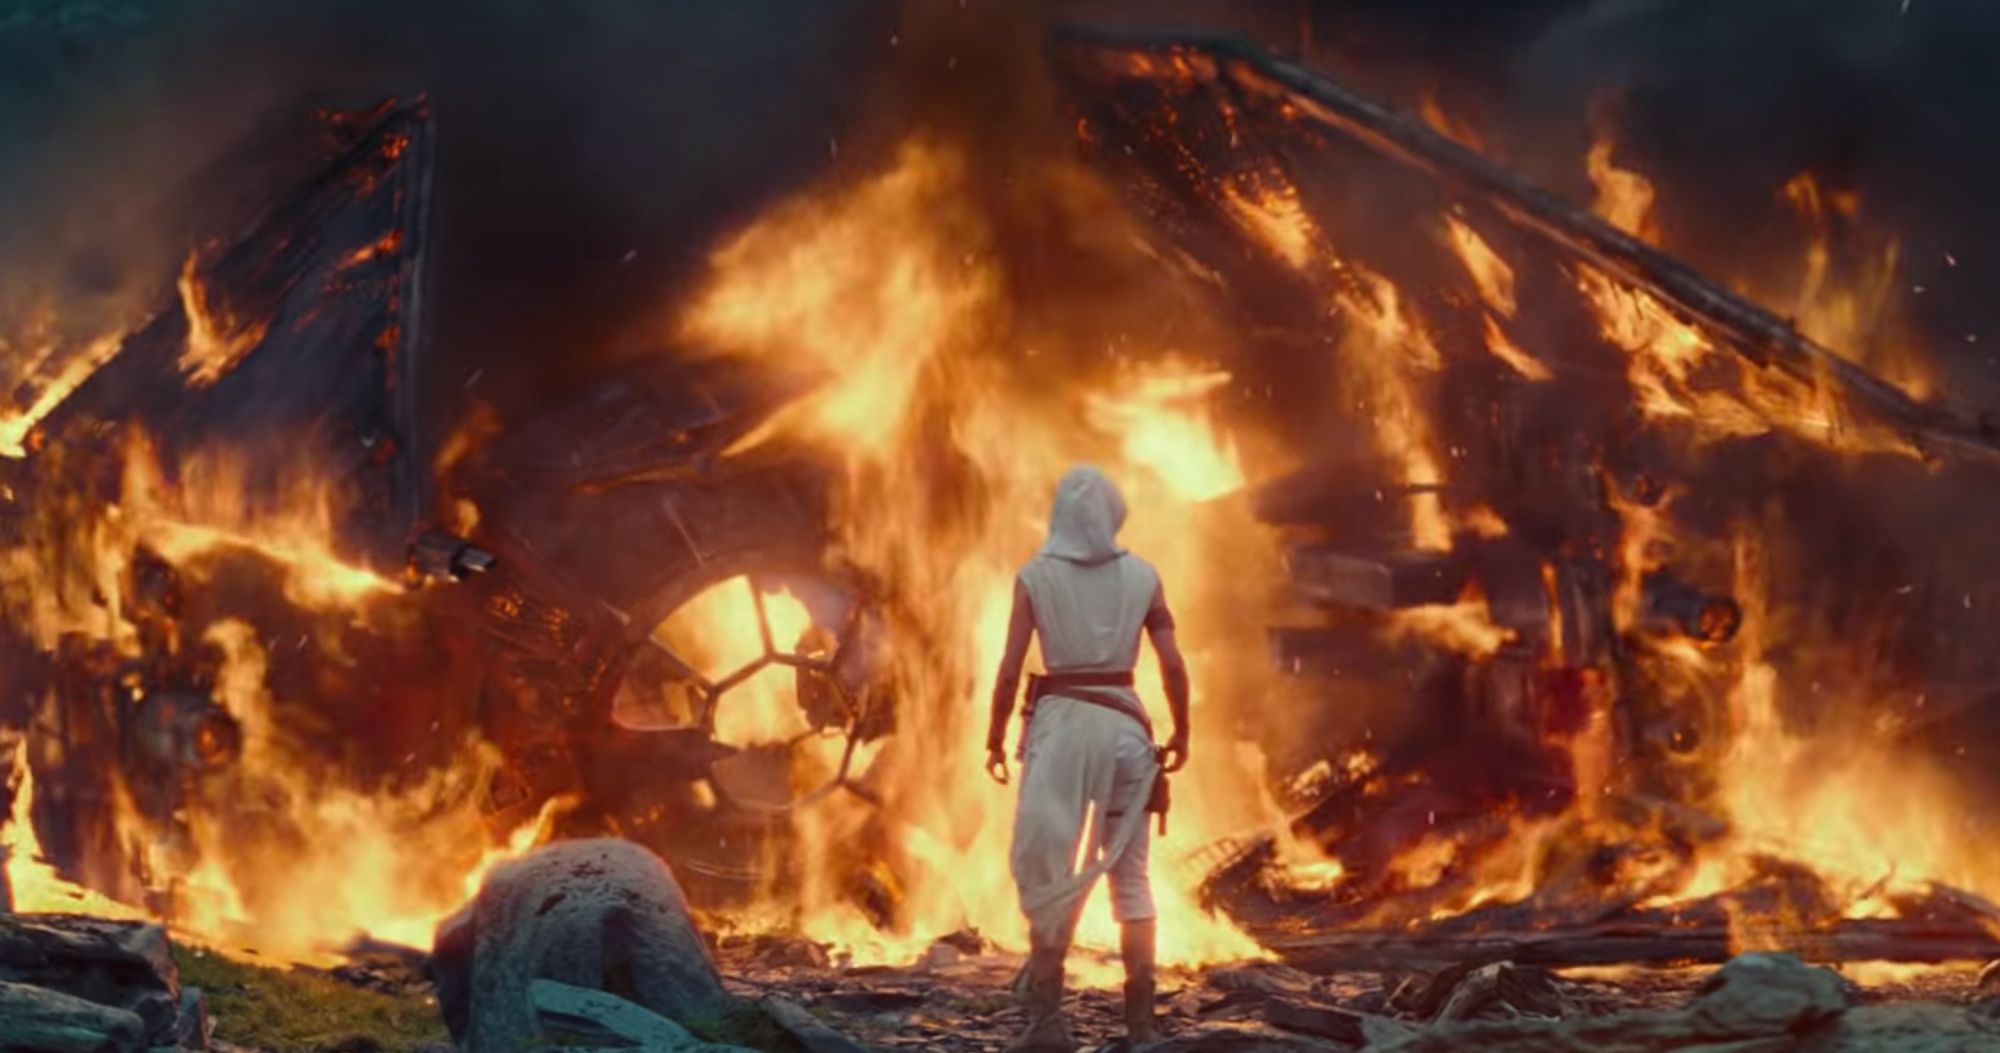 J.J. Abrams Responds to Avalanche of Bad Star Wars 9 Reviews